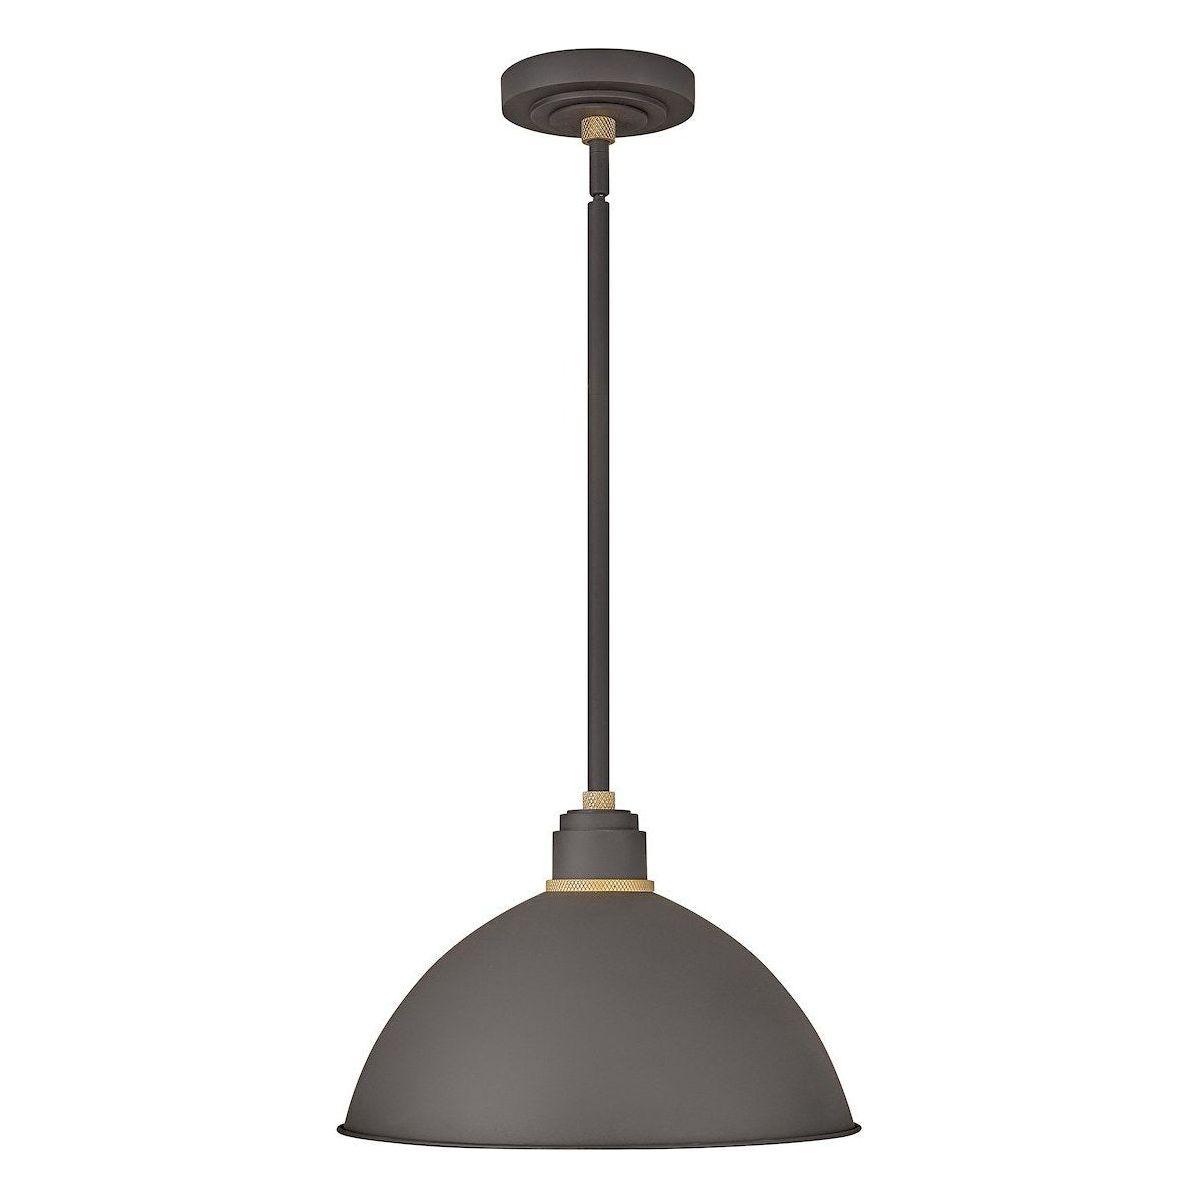 Hinkley - Foundry Dome Outdoor Pendant - Lights Canada